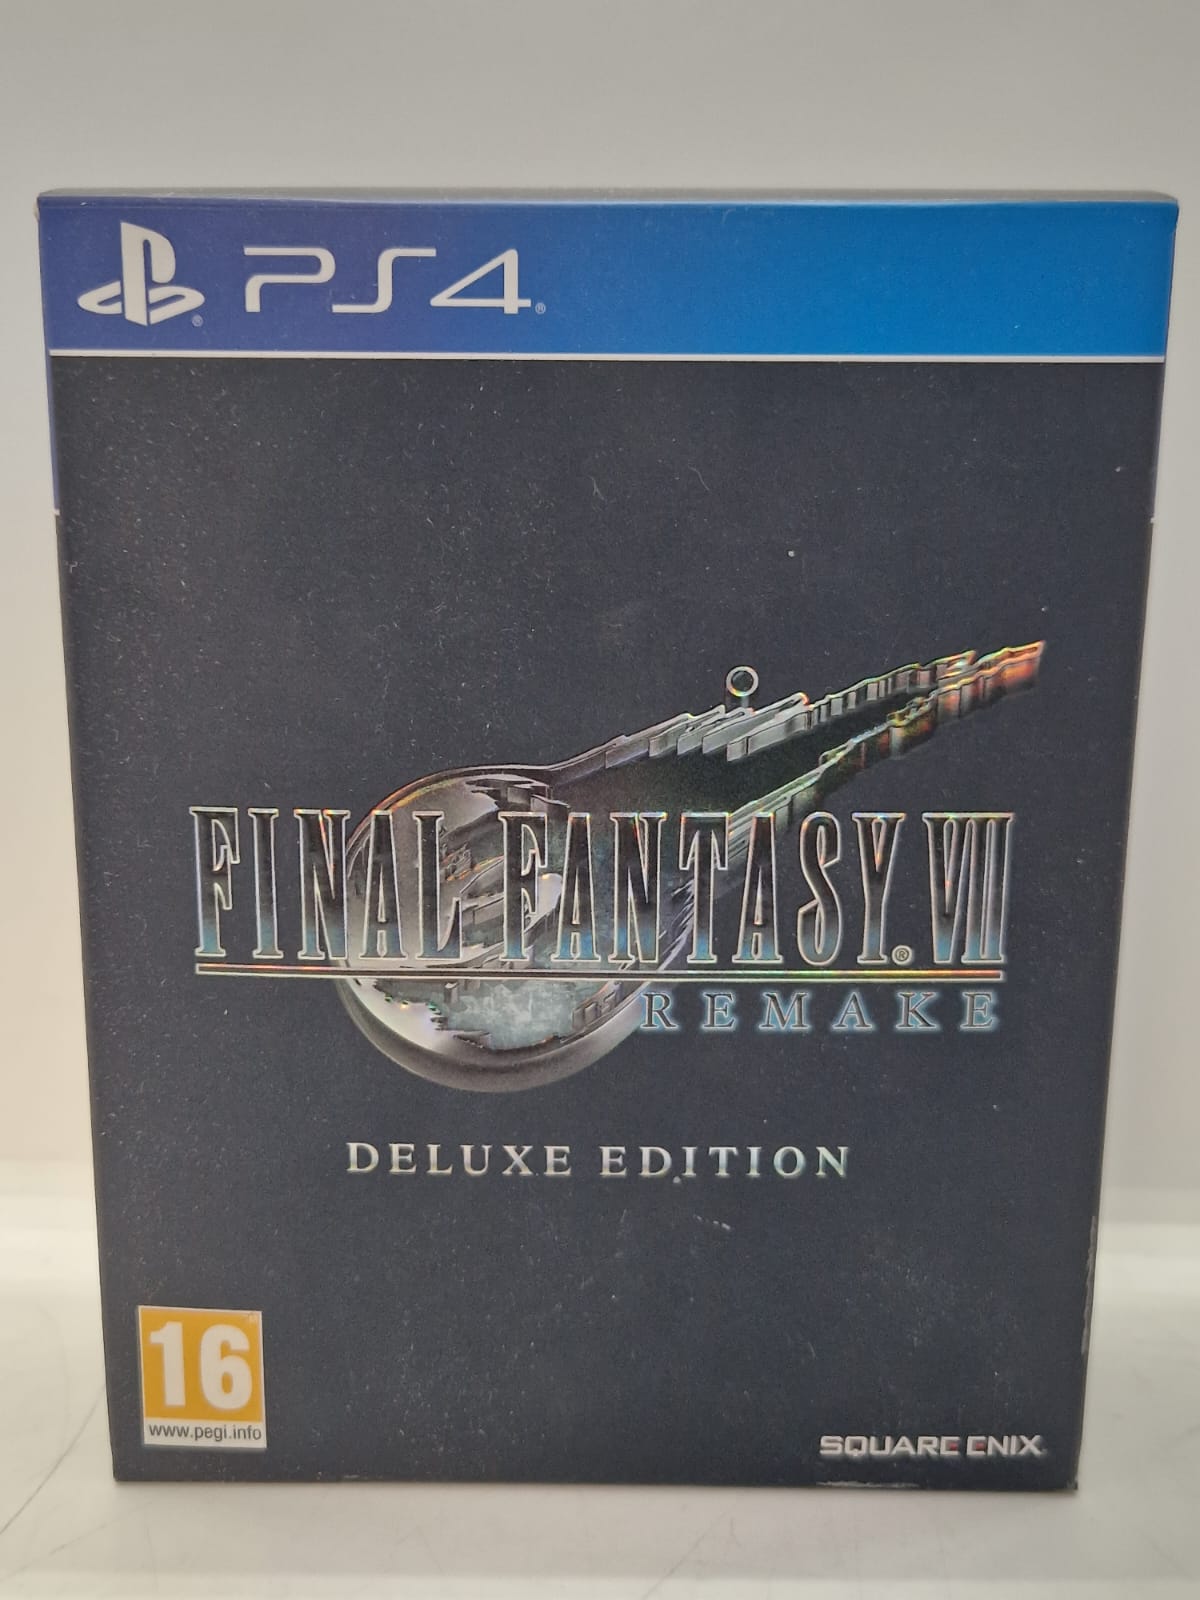 Sony PlayStation 4 Final Fantasy VII Remake Deluxe Edition Video Game